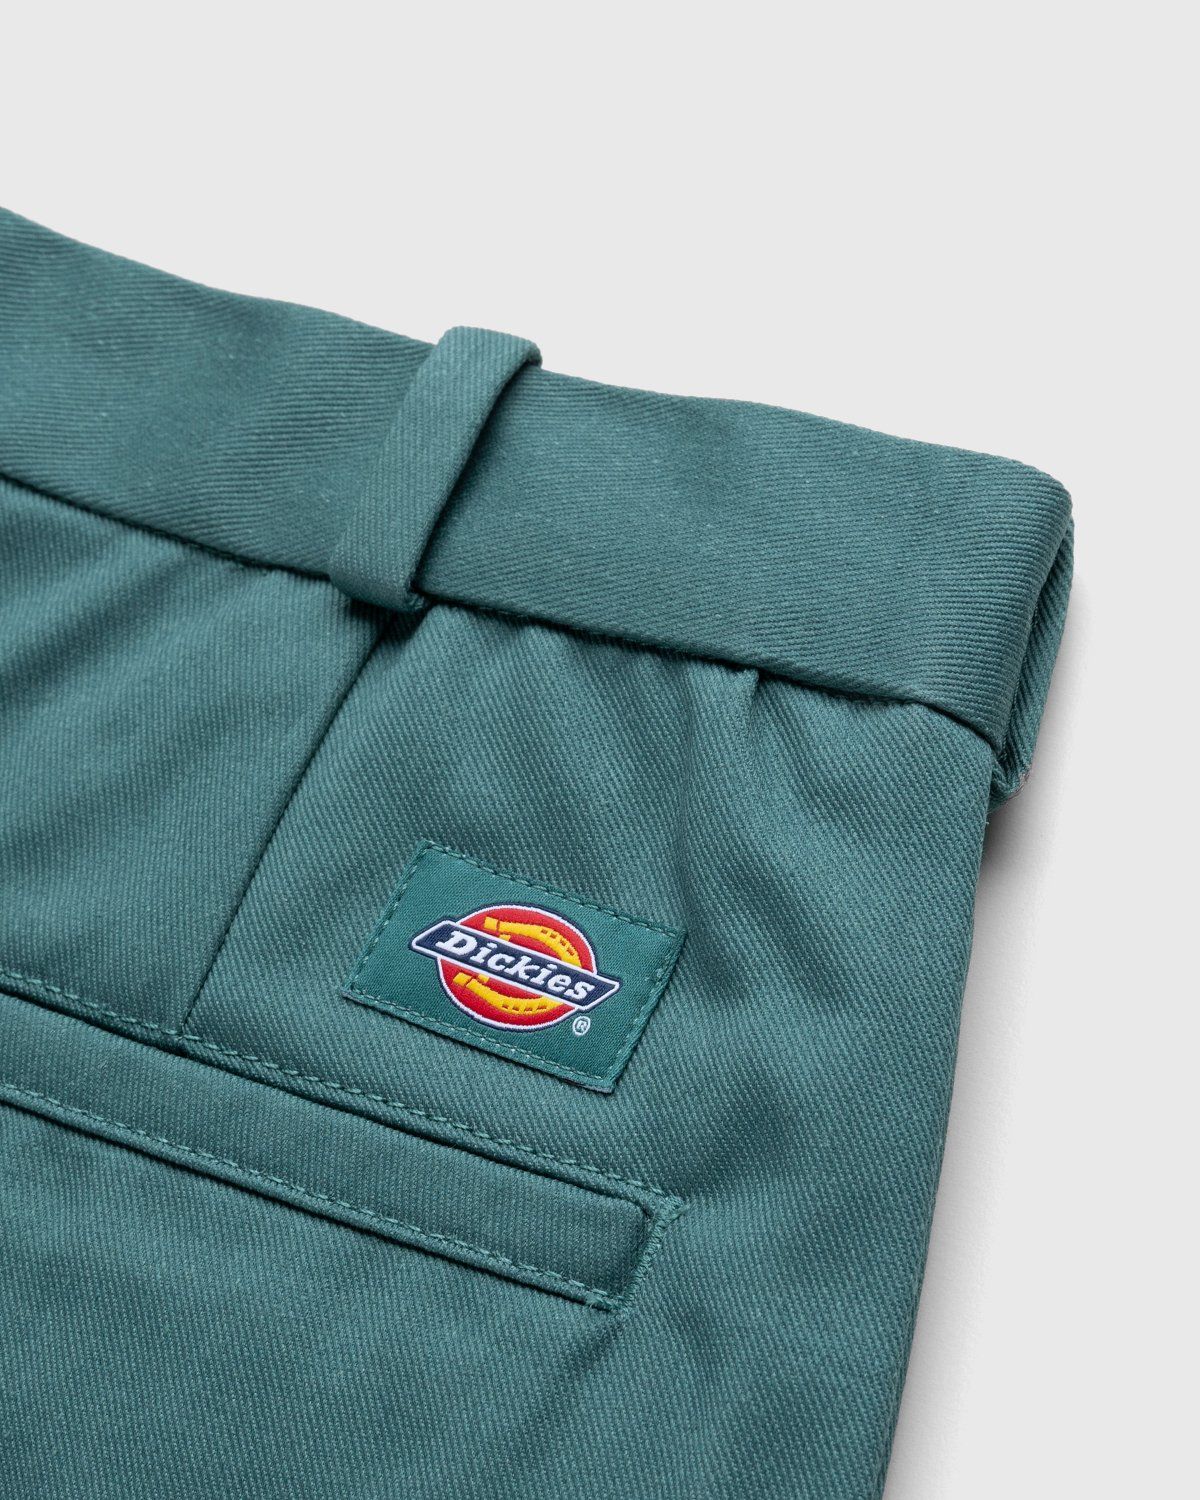 Highsnobiety x Dickies – Pleated Work Pants Lincoln Green - Work Pants - Green - Image 5